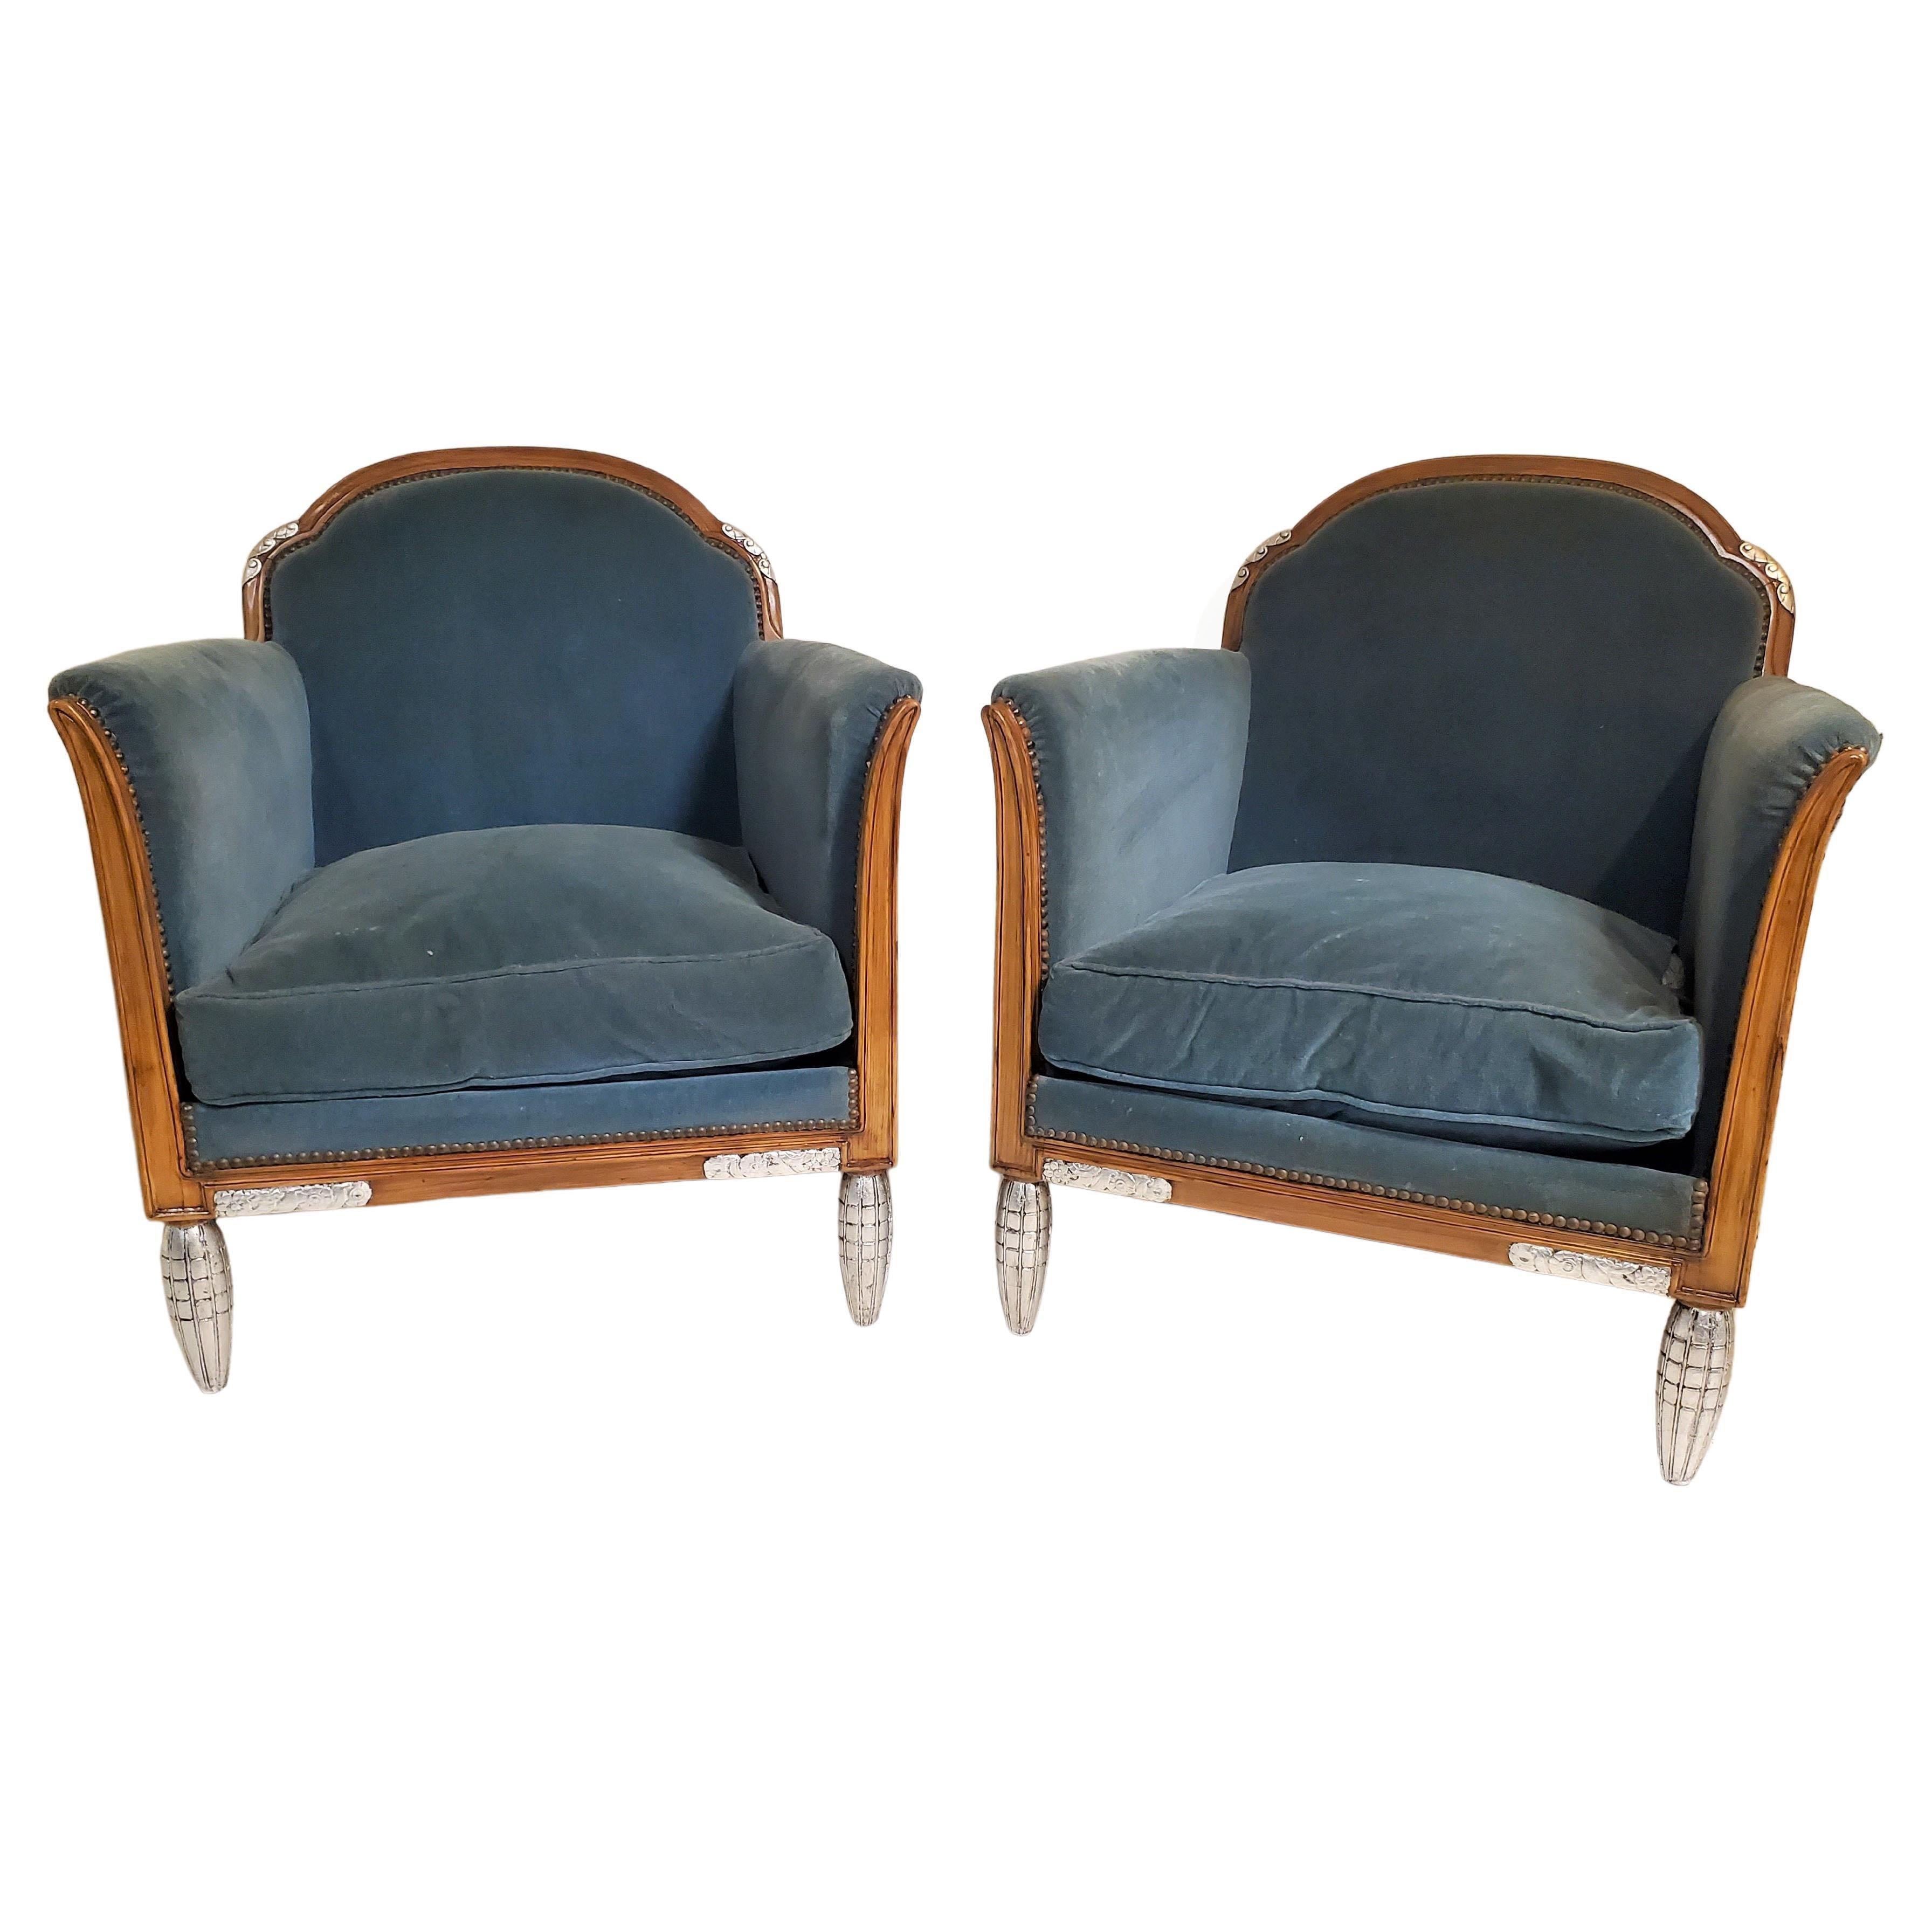 A splendid pair of expansive and comfortable French Art Deco armchairs attributed to Paul Follot (1877-1941) featuring gracefully curved, half-rounded backrests and stylized blade shaped arms that splay open exuding a warm and inviting